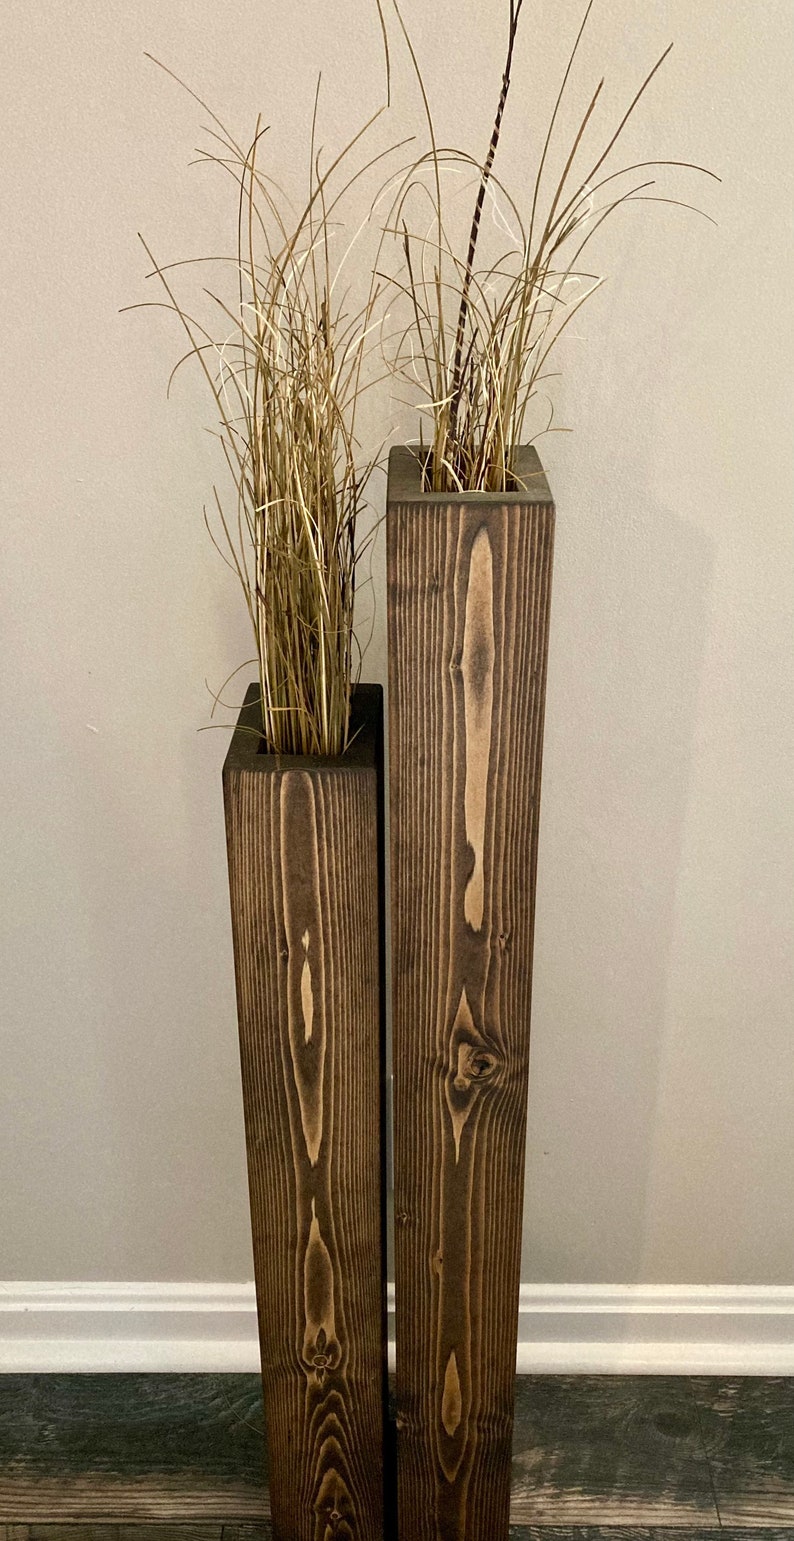 Set-24 and 18 Rustic Floor Vases/Wood Vase/Home Decor/Decorative Vase/Home and Living/Living Room Decor/Handmade/Free Shipping image 6